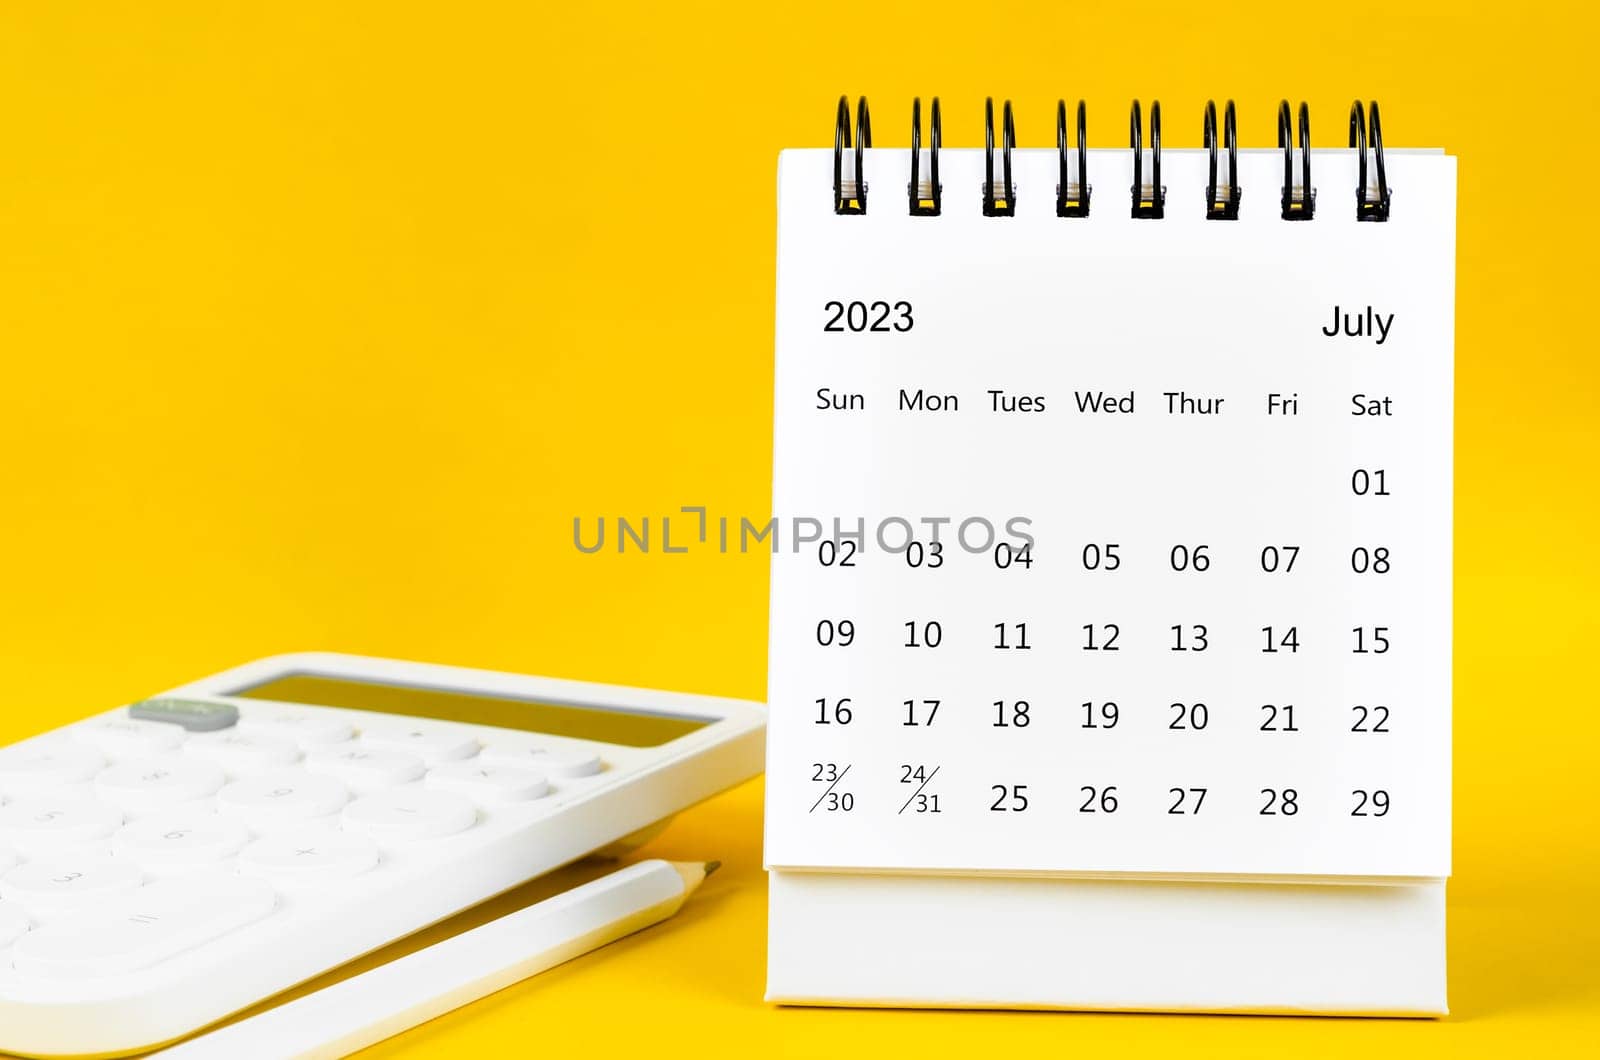 July 2023 Monthly desk calendar for 2023 year and calculator with pen on yellow background.